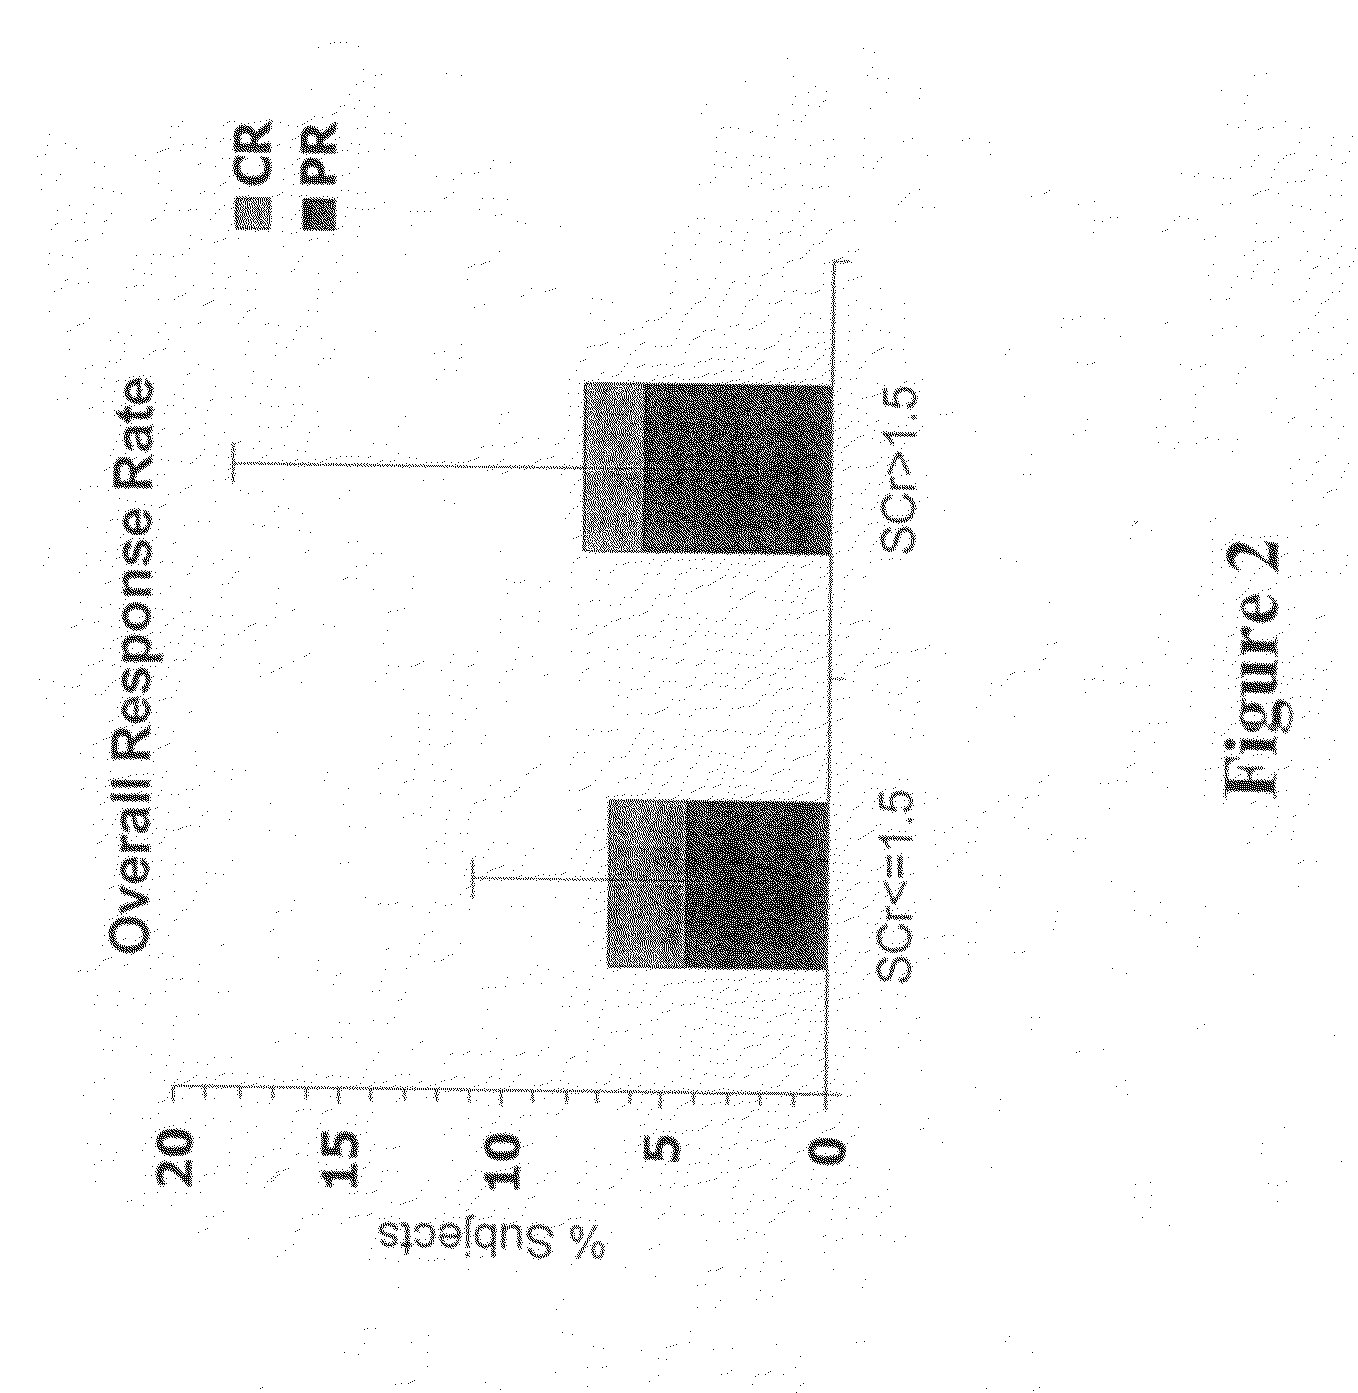 Methods for treating renal cell carcinoma